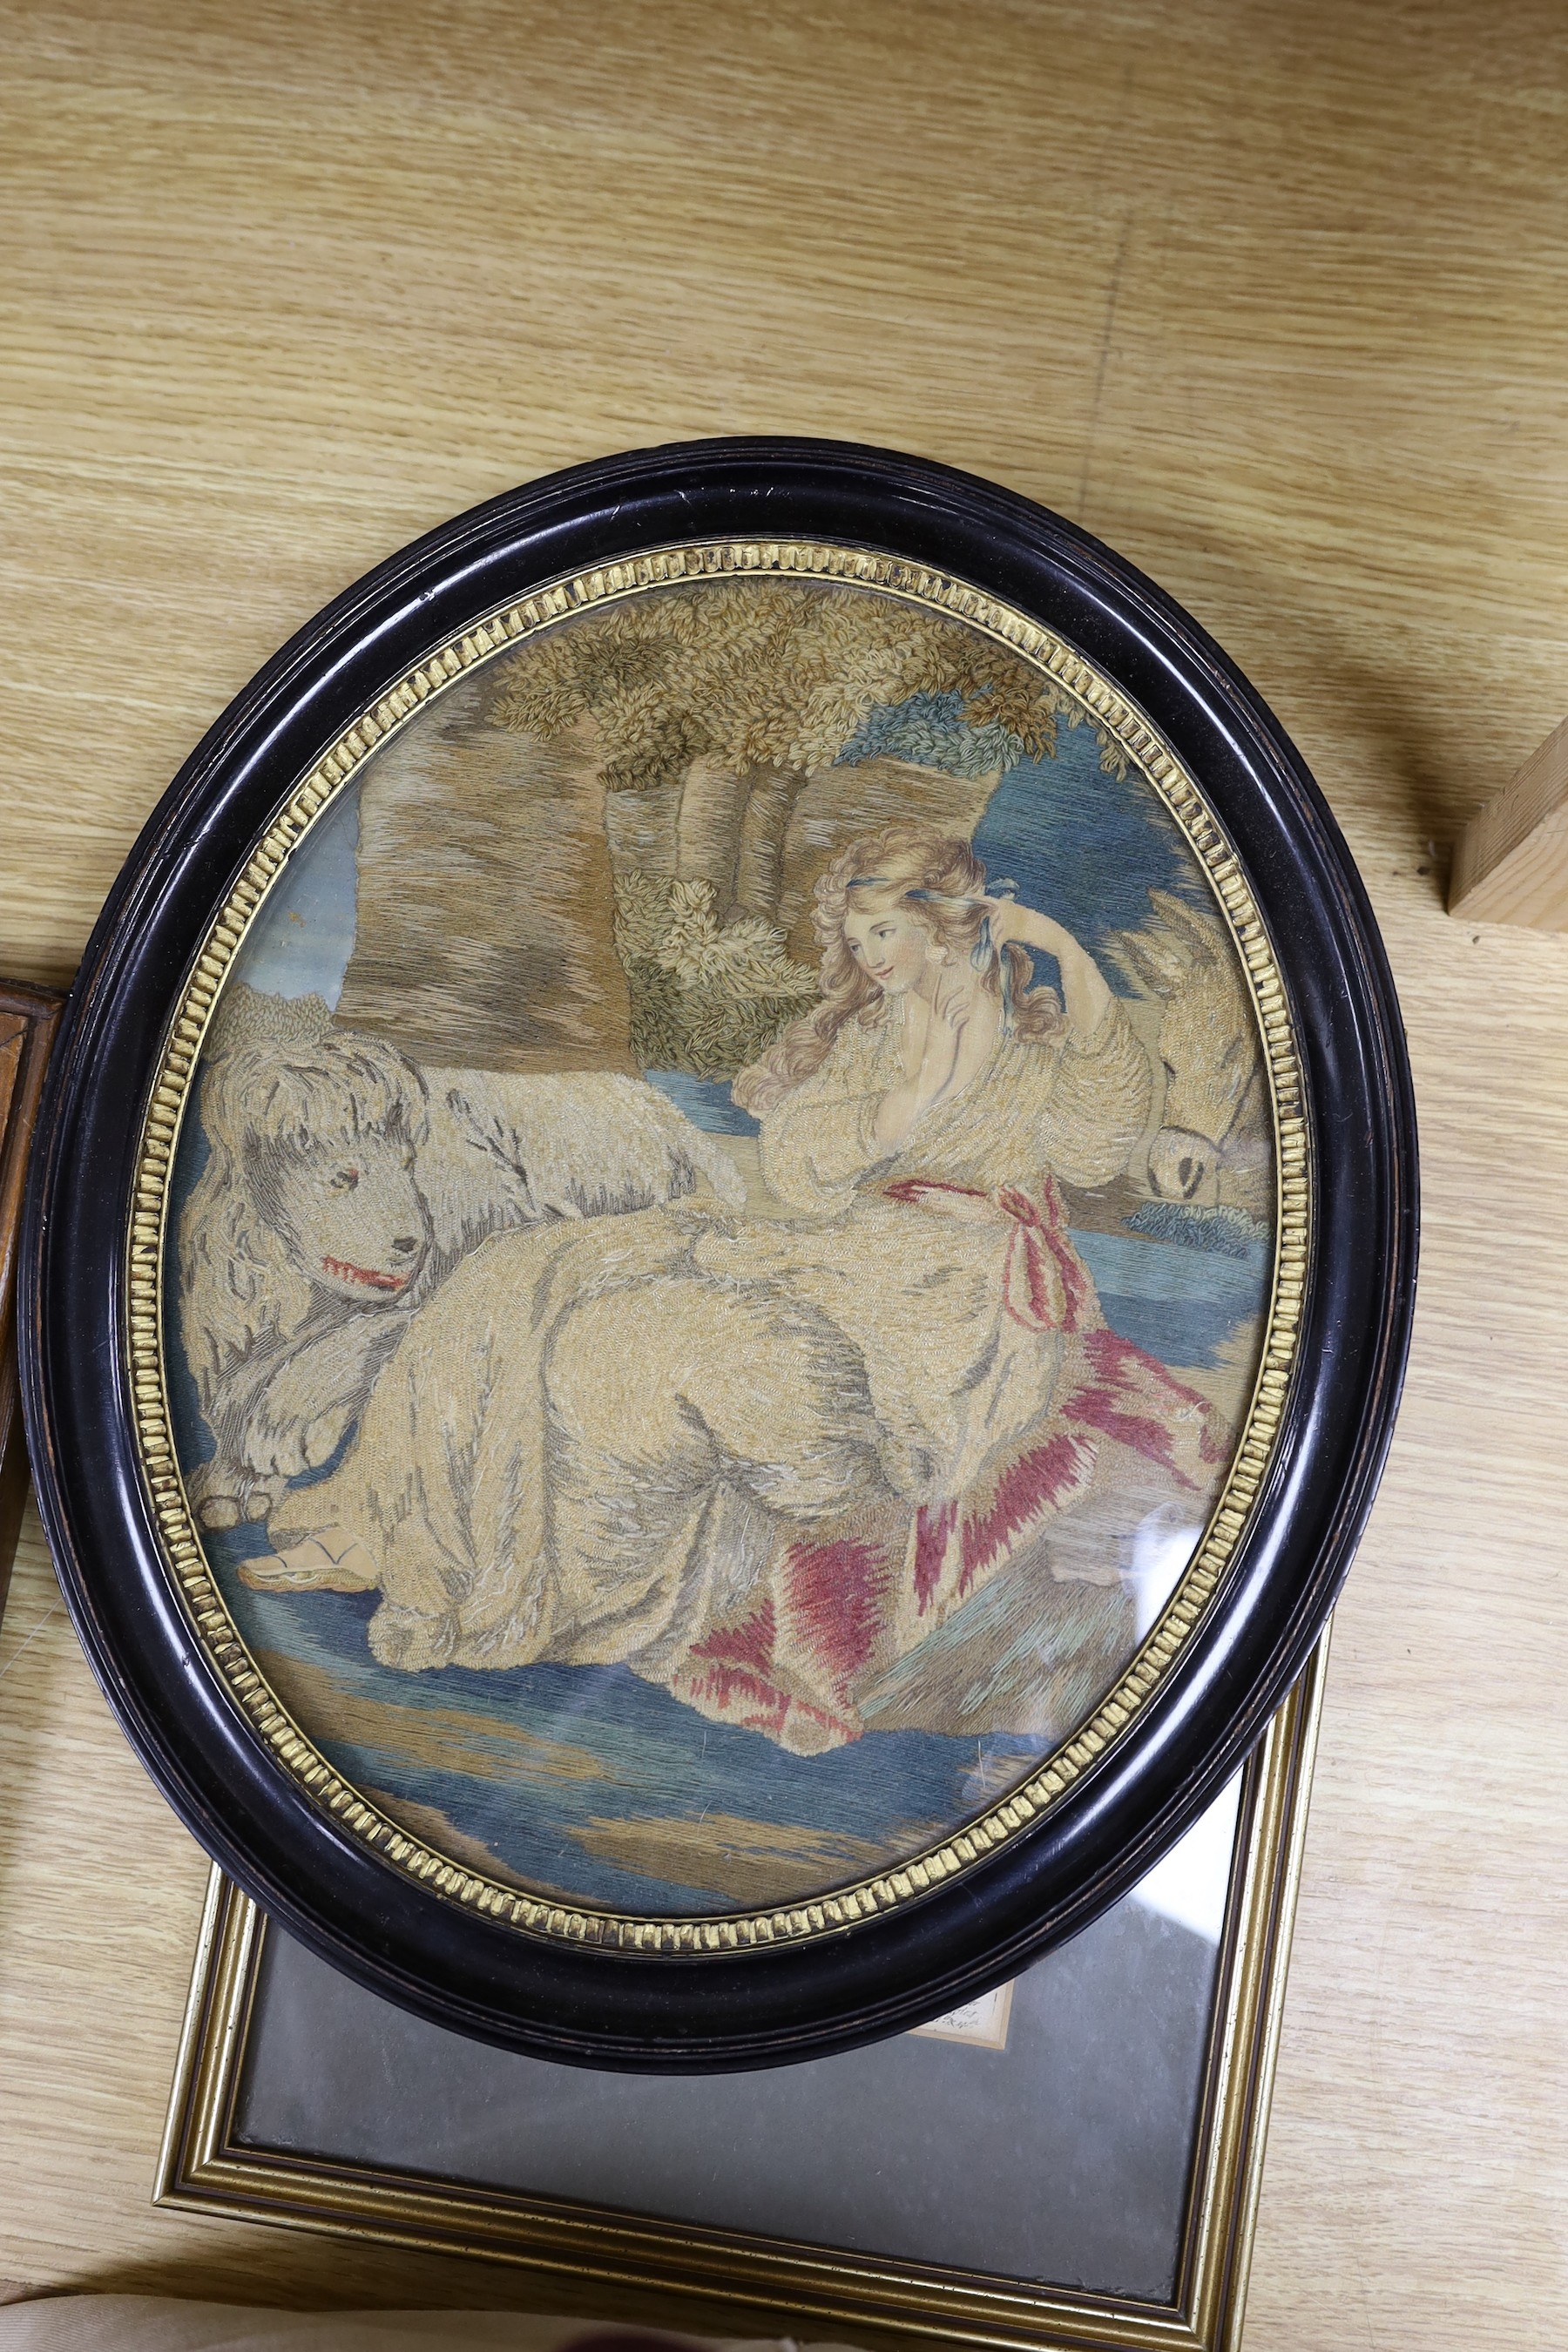 Three late 19th / early 20th century framed tapestries - a mountain scape with farmer and heard, a female figure with animal, and a with lions and men on horseback fighting scene, together with two maps - ‘Gloucestershir